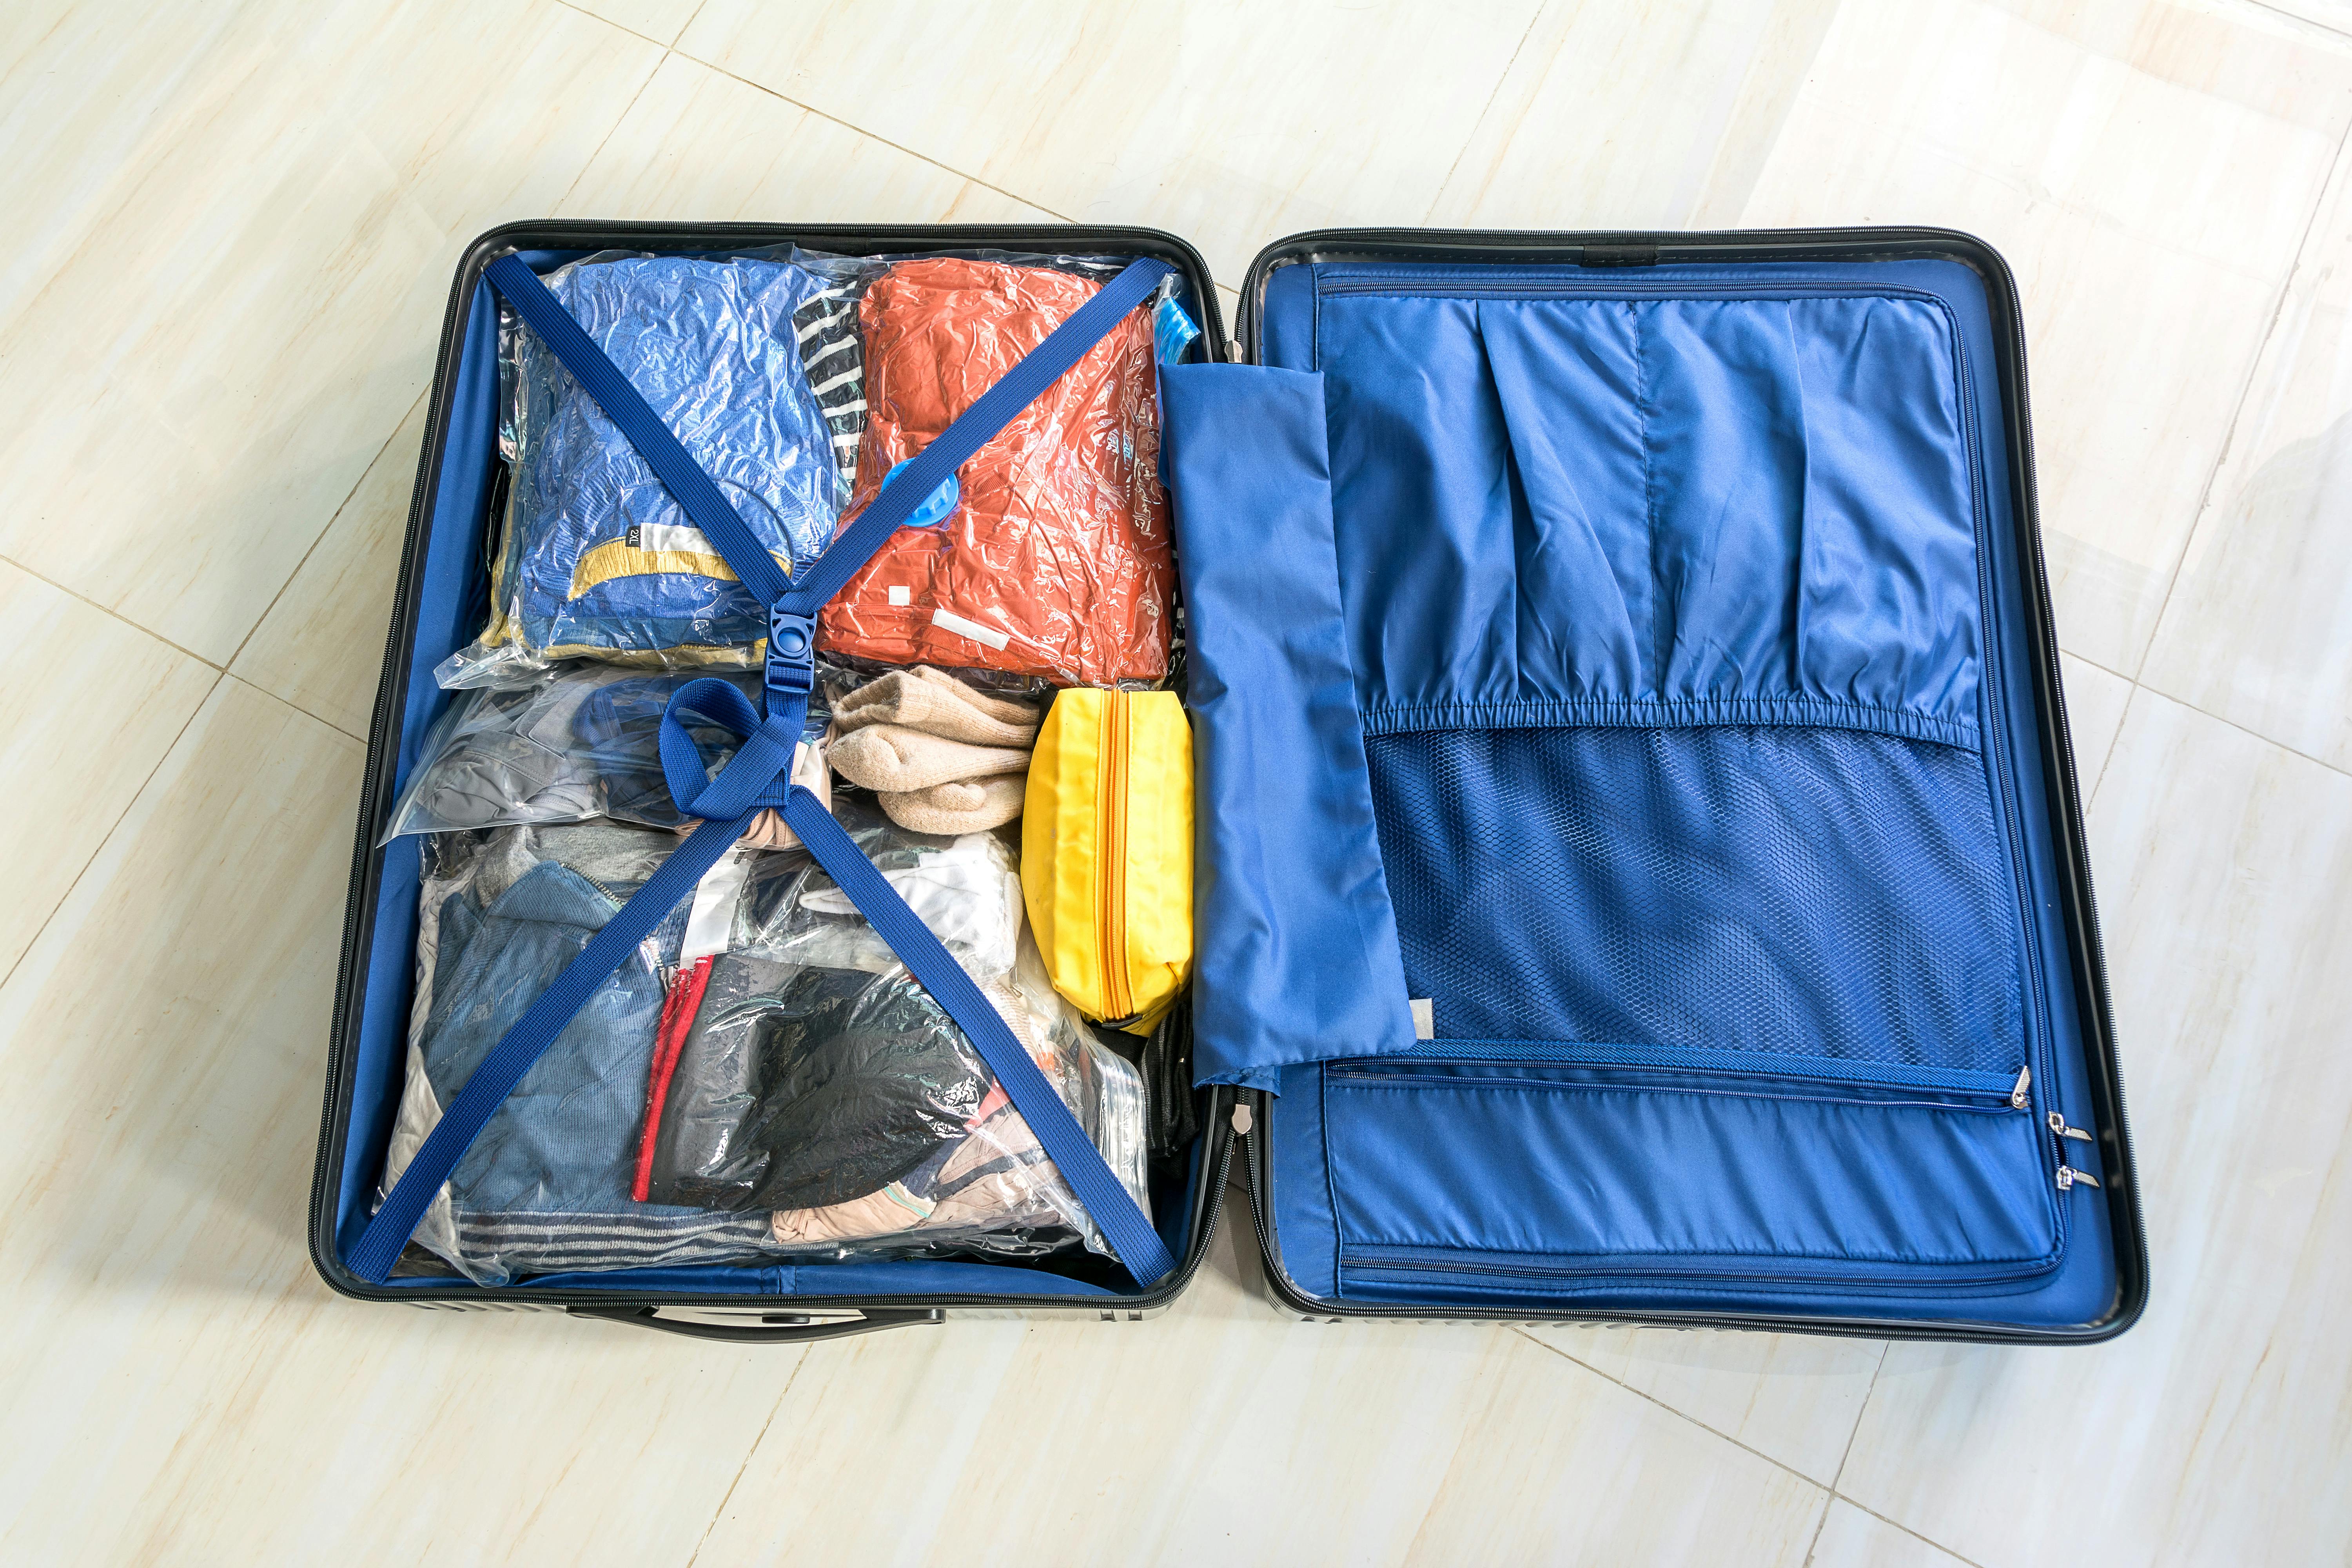 Packing luggage with resealable bags to save space